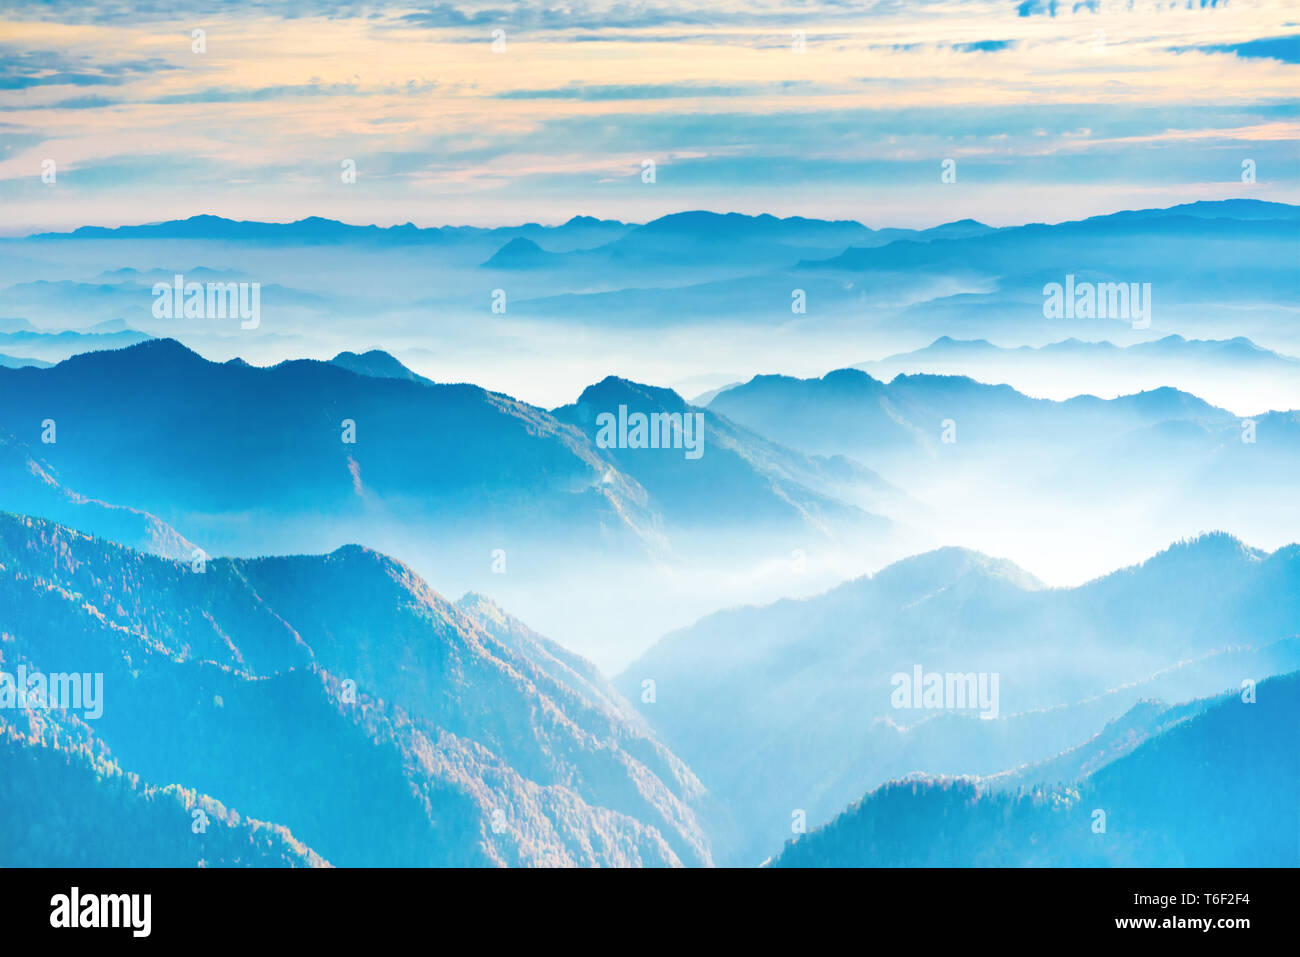 Landscape with sunset in blue mountains Stock Photo